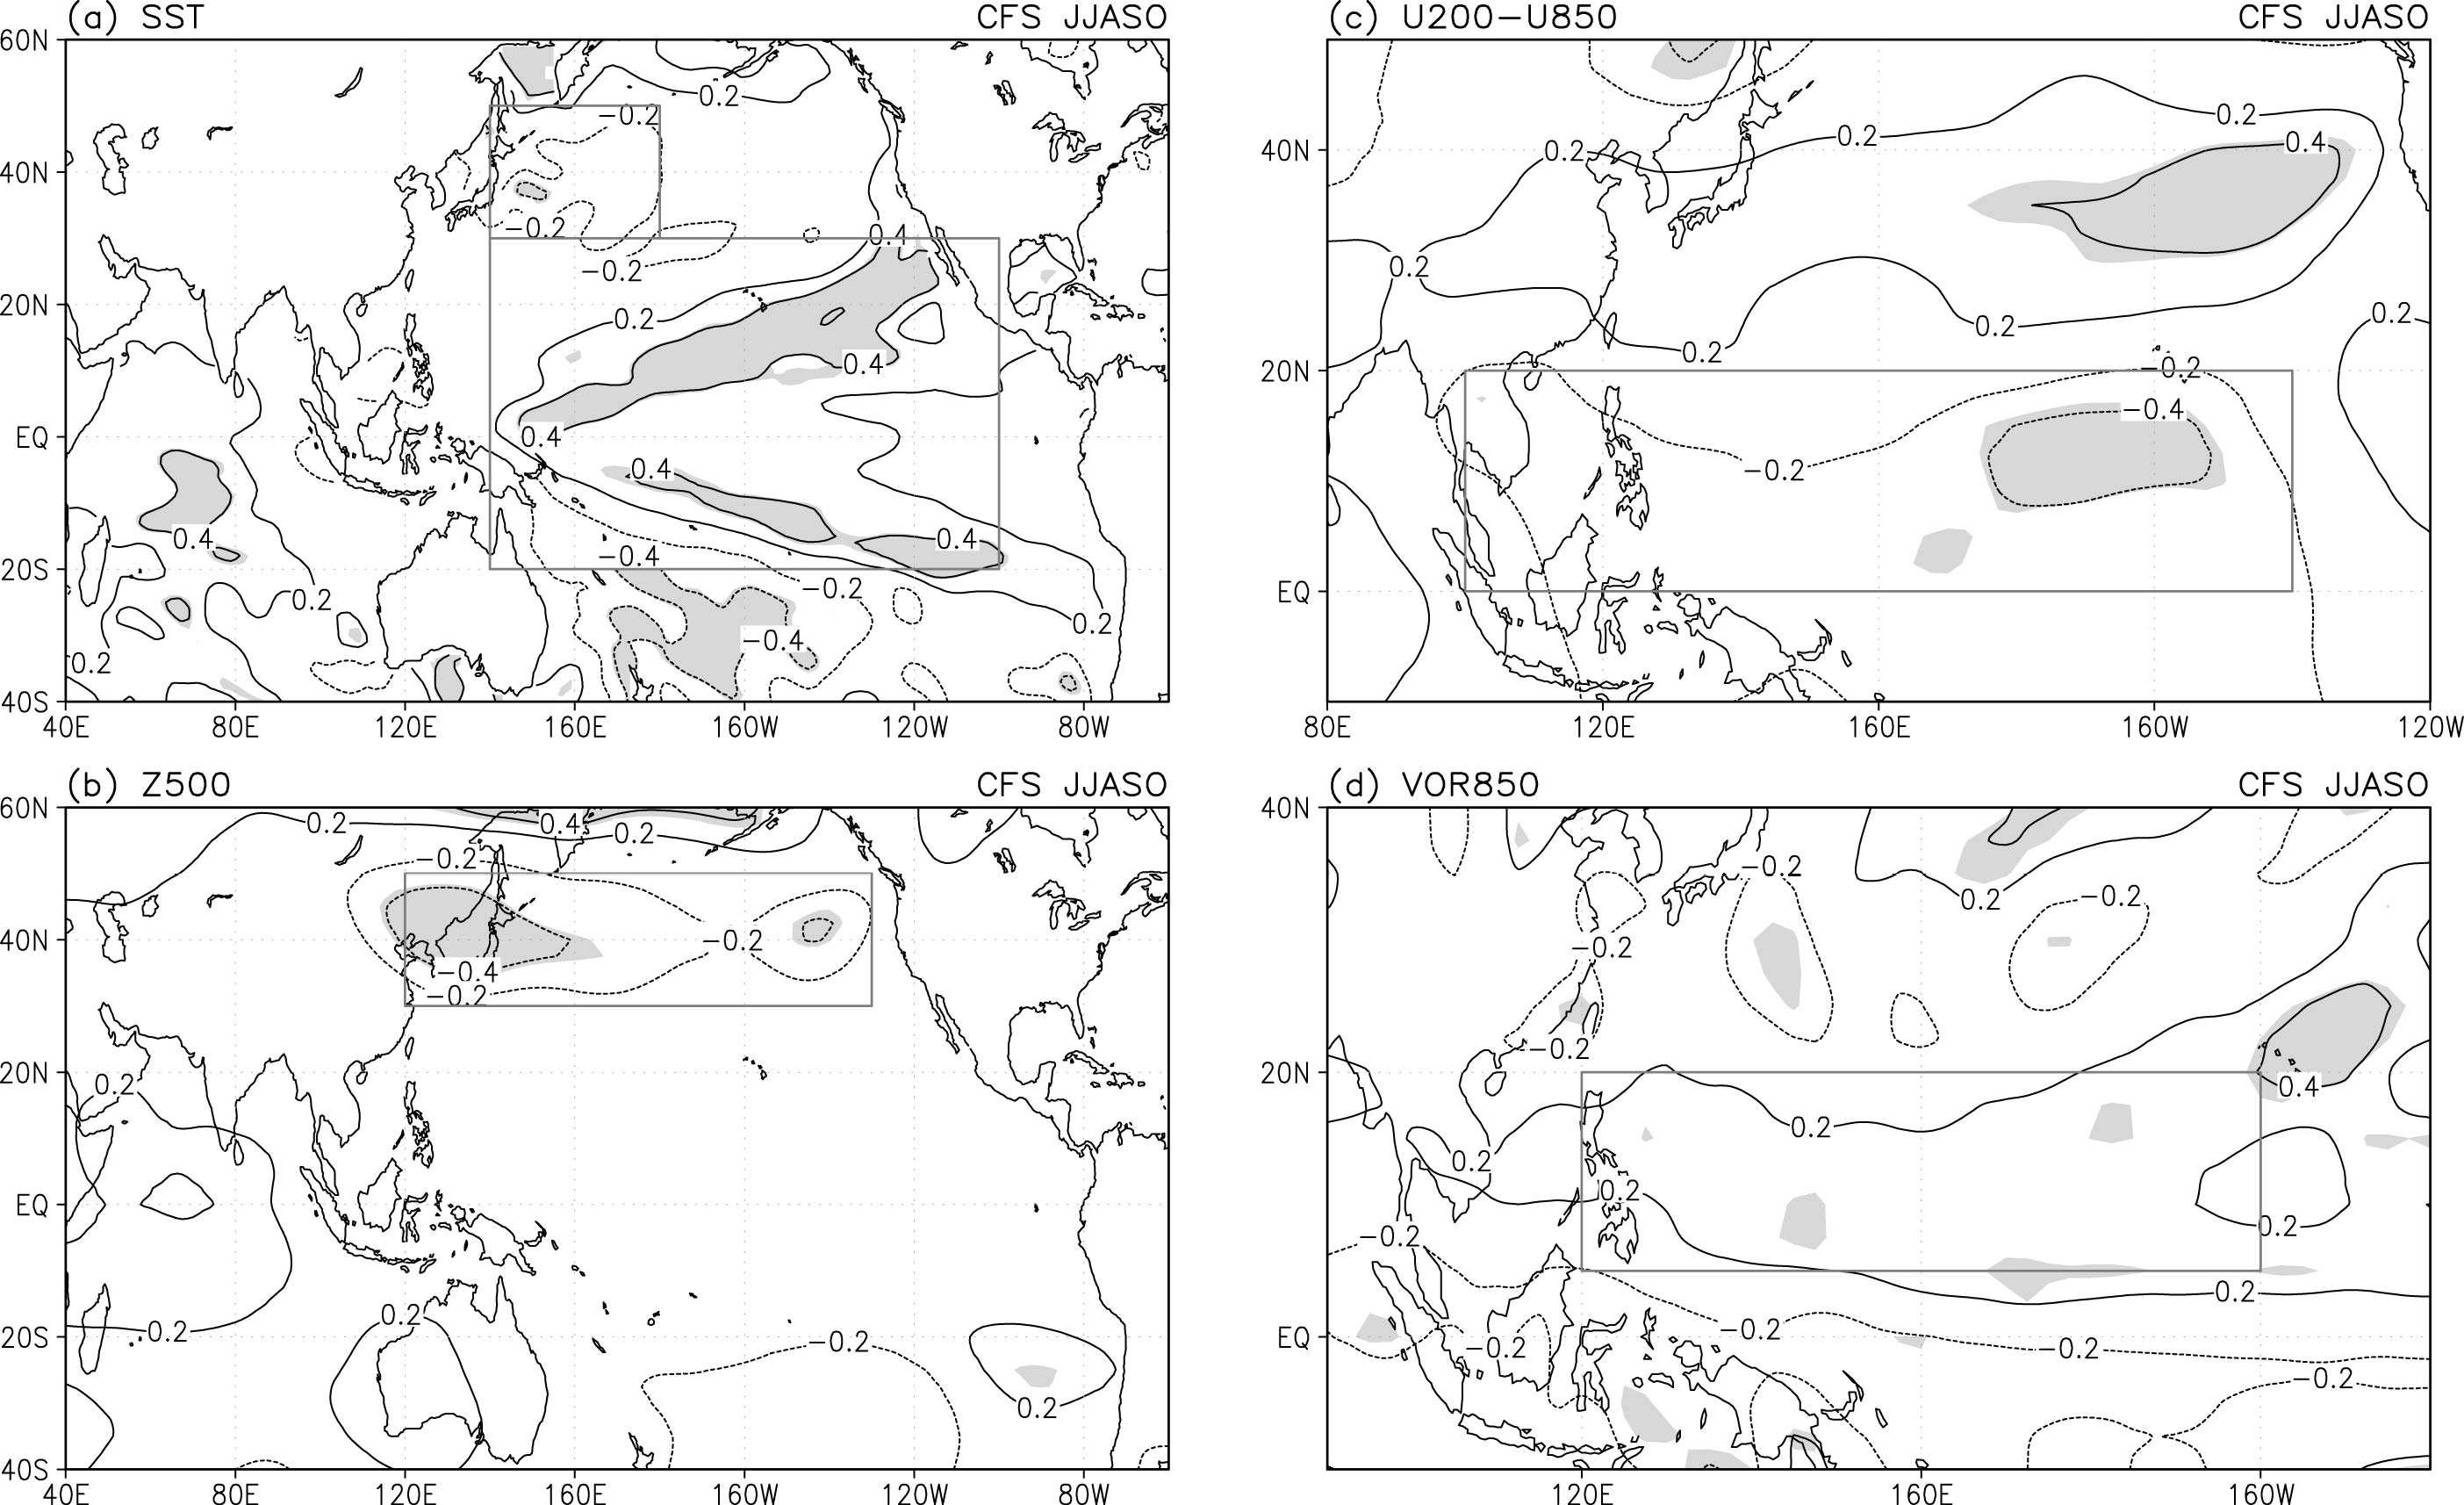 Correlation coefficients between the TC frequency in C3 and the SST, absolute vertical wind shear (VWS), 500-hPa geopotential height (Z500), 850-hPa vorticity (VOR850) in the observations (a−d) during June−October for the period 1981−2006.